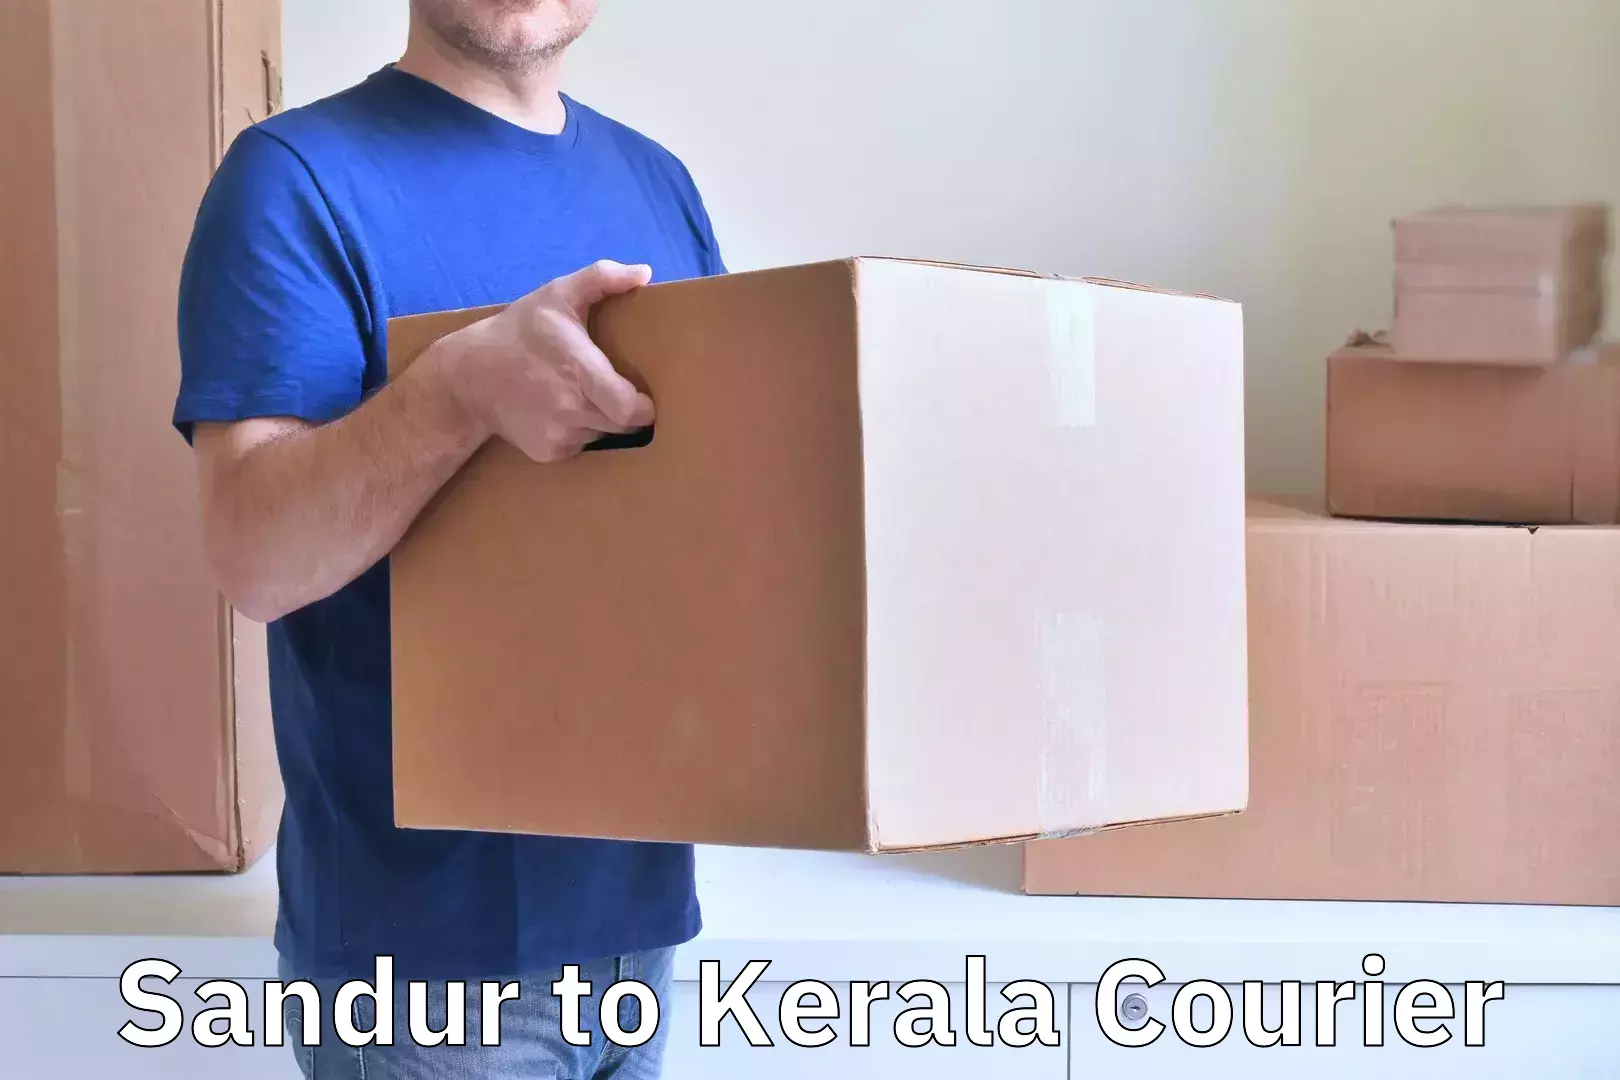 Luggage delivery network Sandur to Kerala